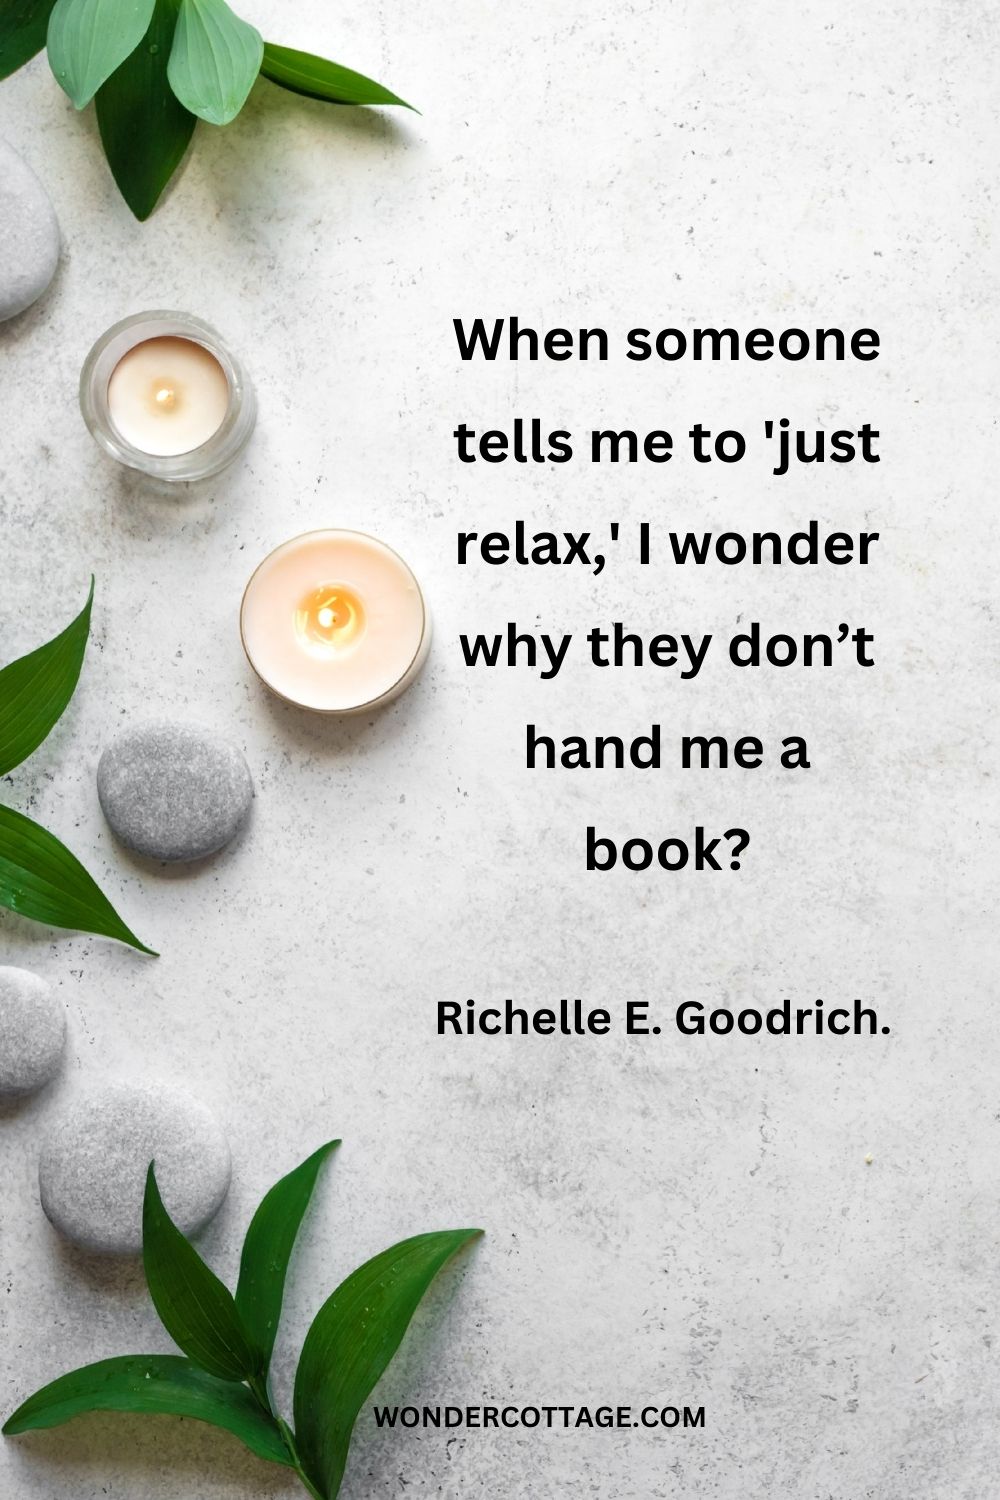 When someone tells me to 'just relax,' I wonder why they don’t hand me a book? Richelle E. Goodrich.